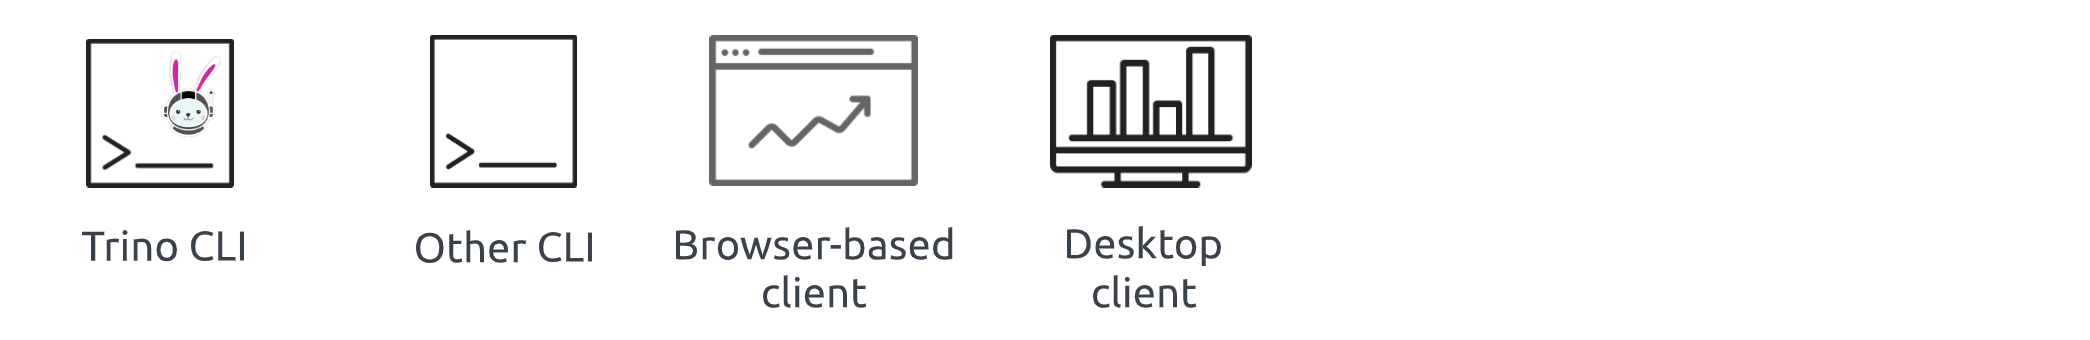 Icons depicting SQL clients